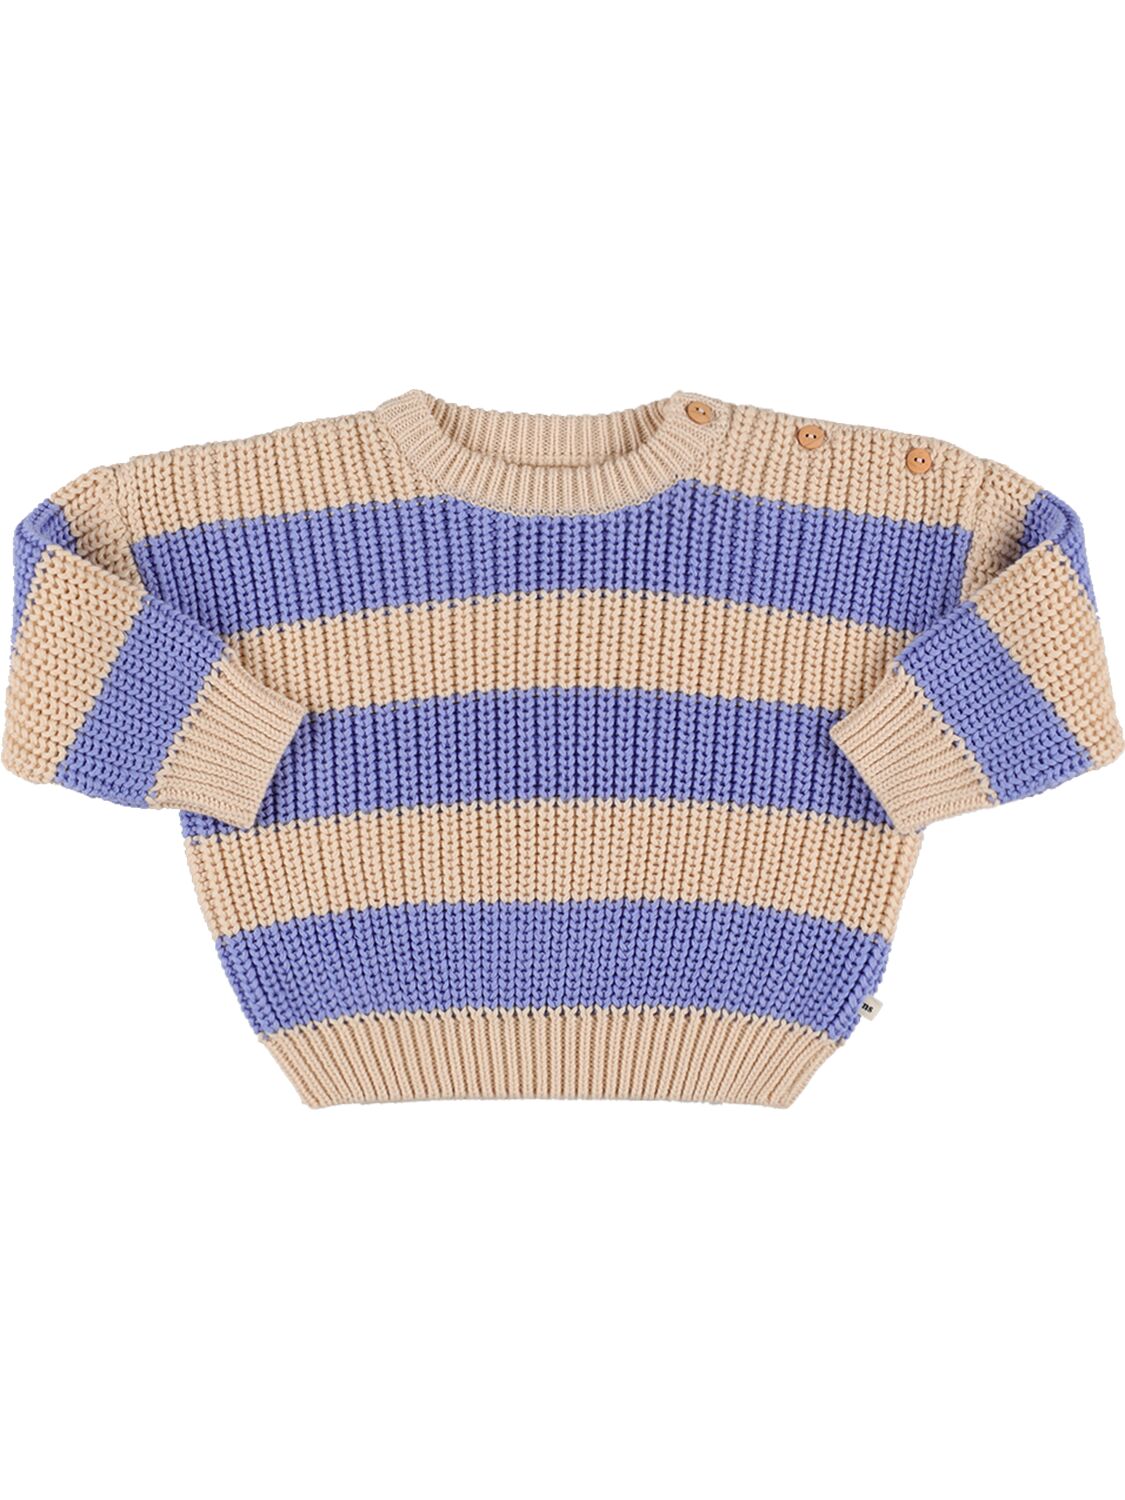 The New Society Kids' Organic Cotton Knit Sweater In Beige,blue